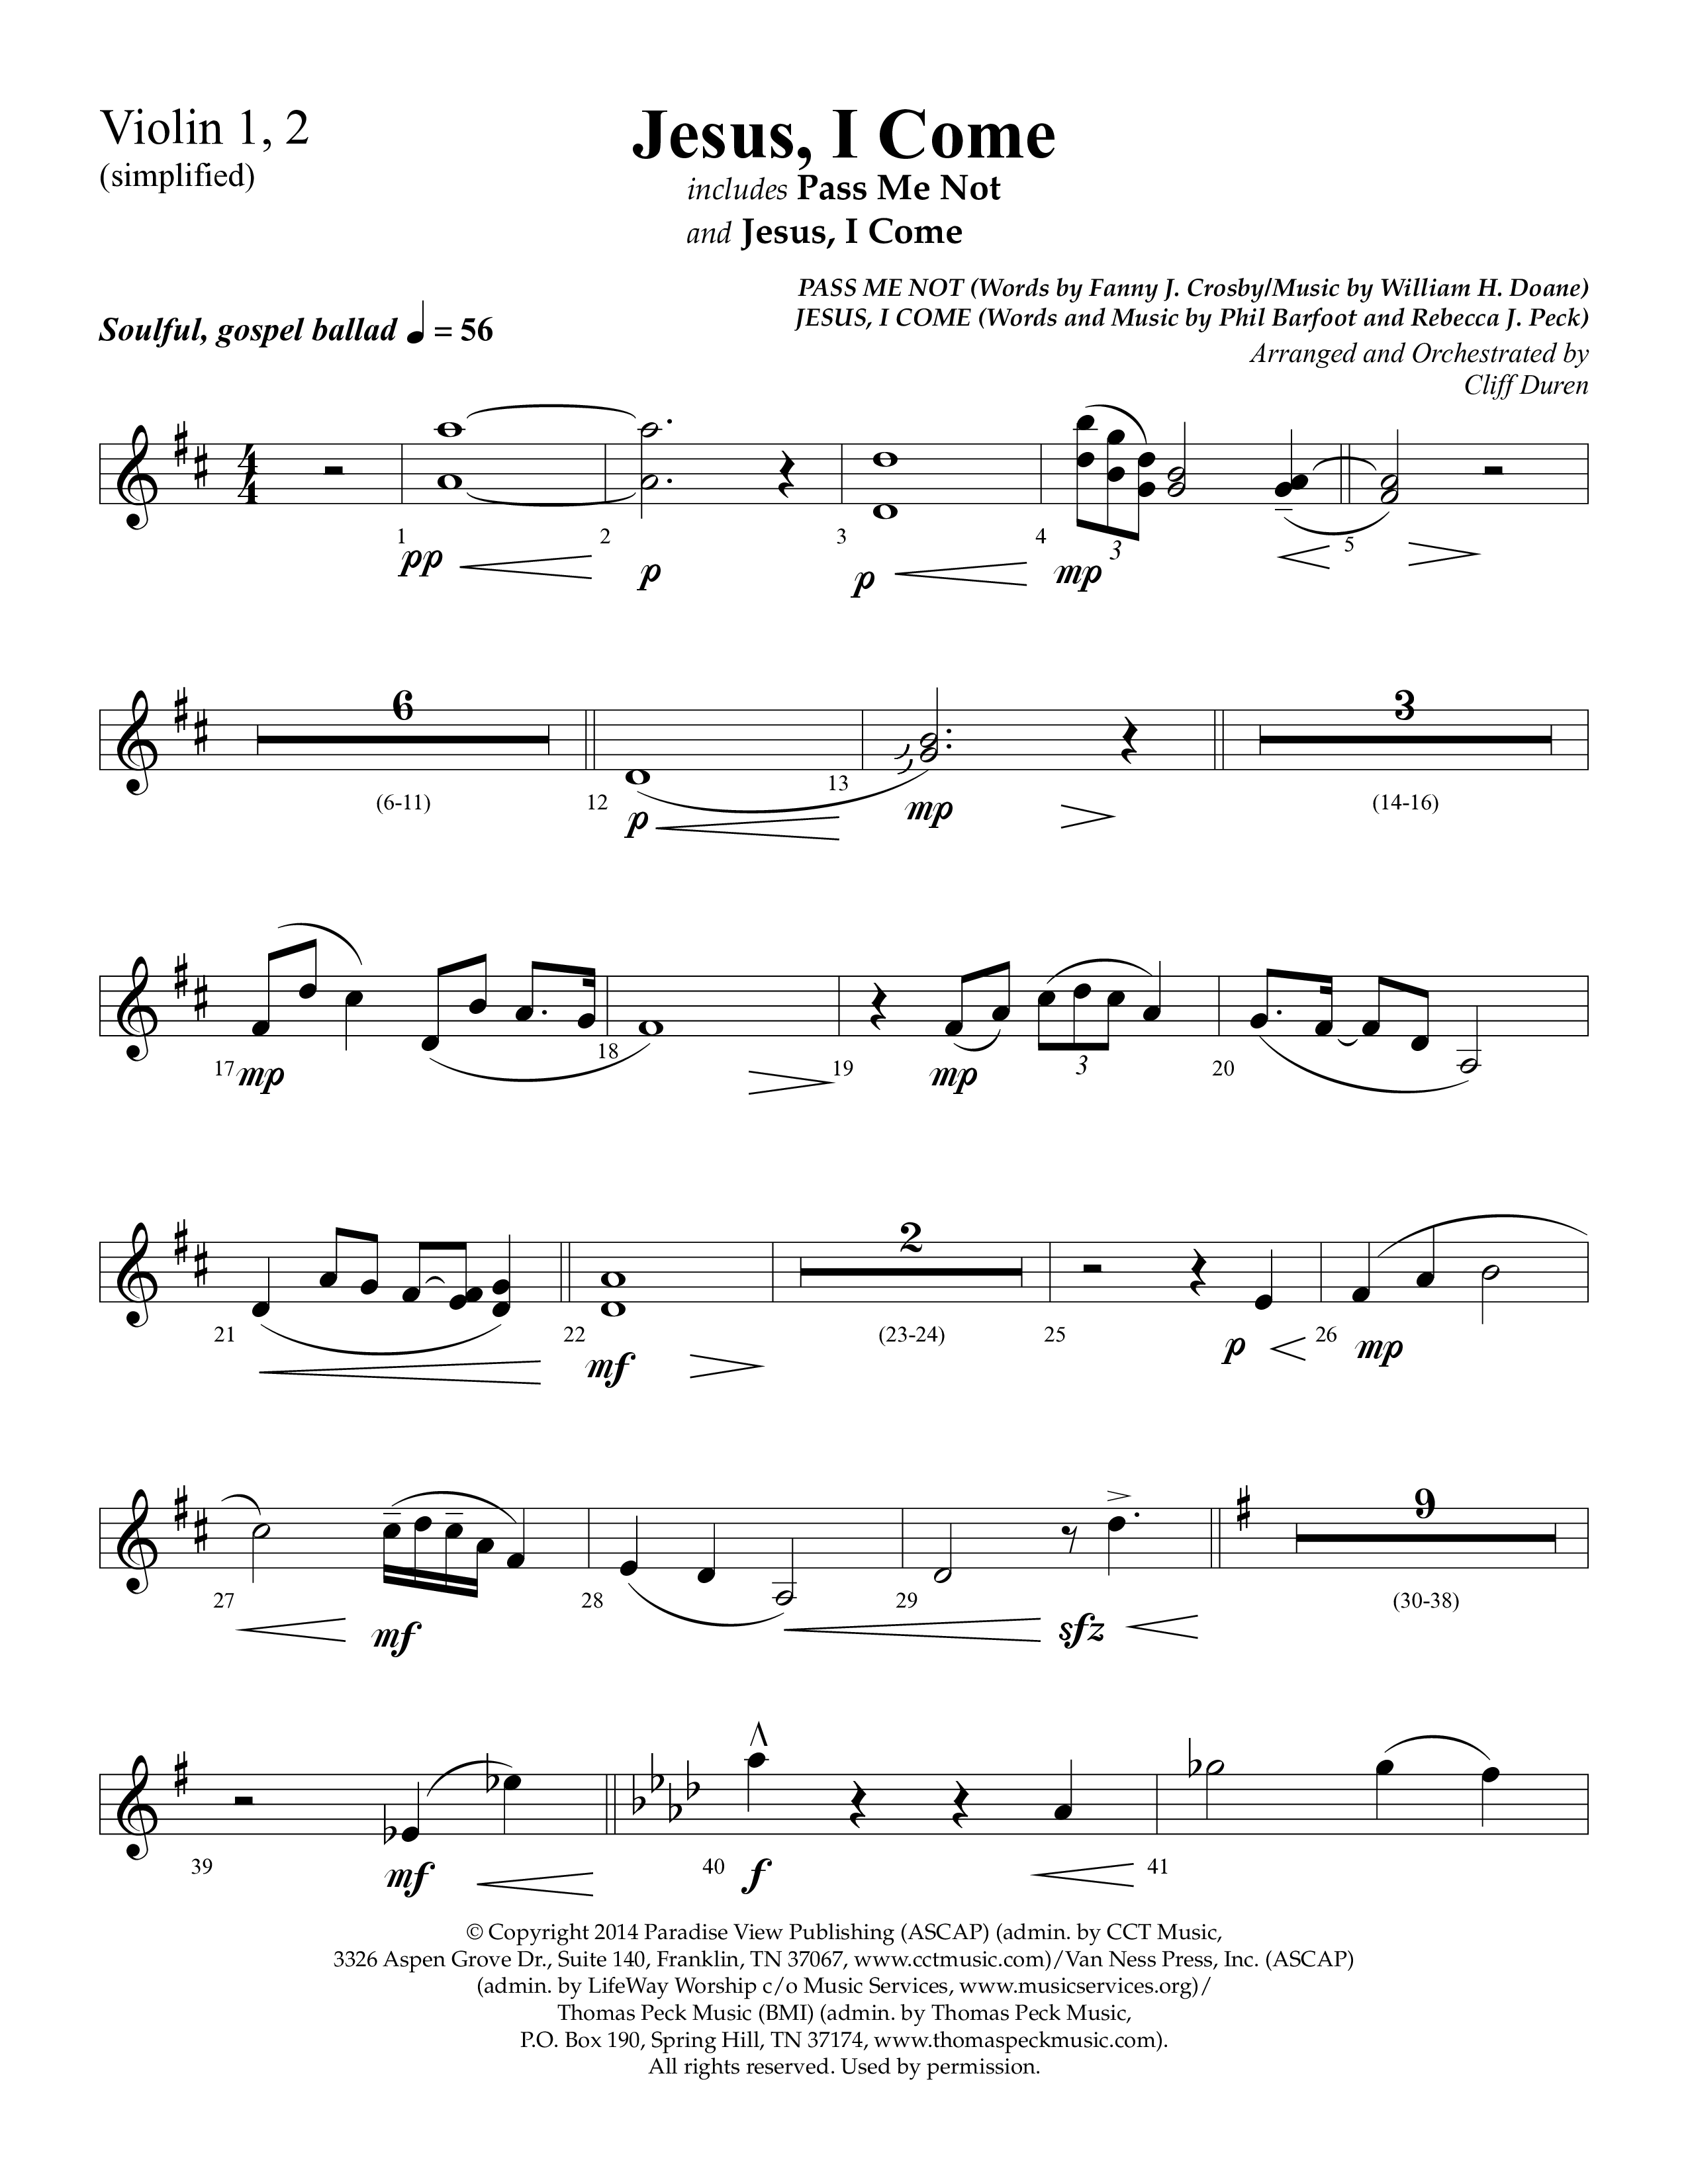 Jesus I Come (with Pass Me Not) (Choral Anthem SATB) Violin 1/2 (Lifeway Choral / Arr. Cliff Duren)